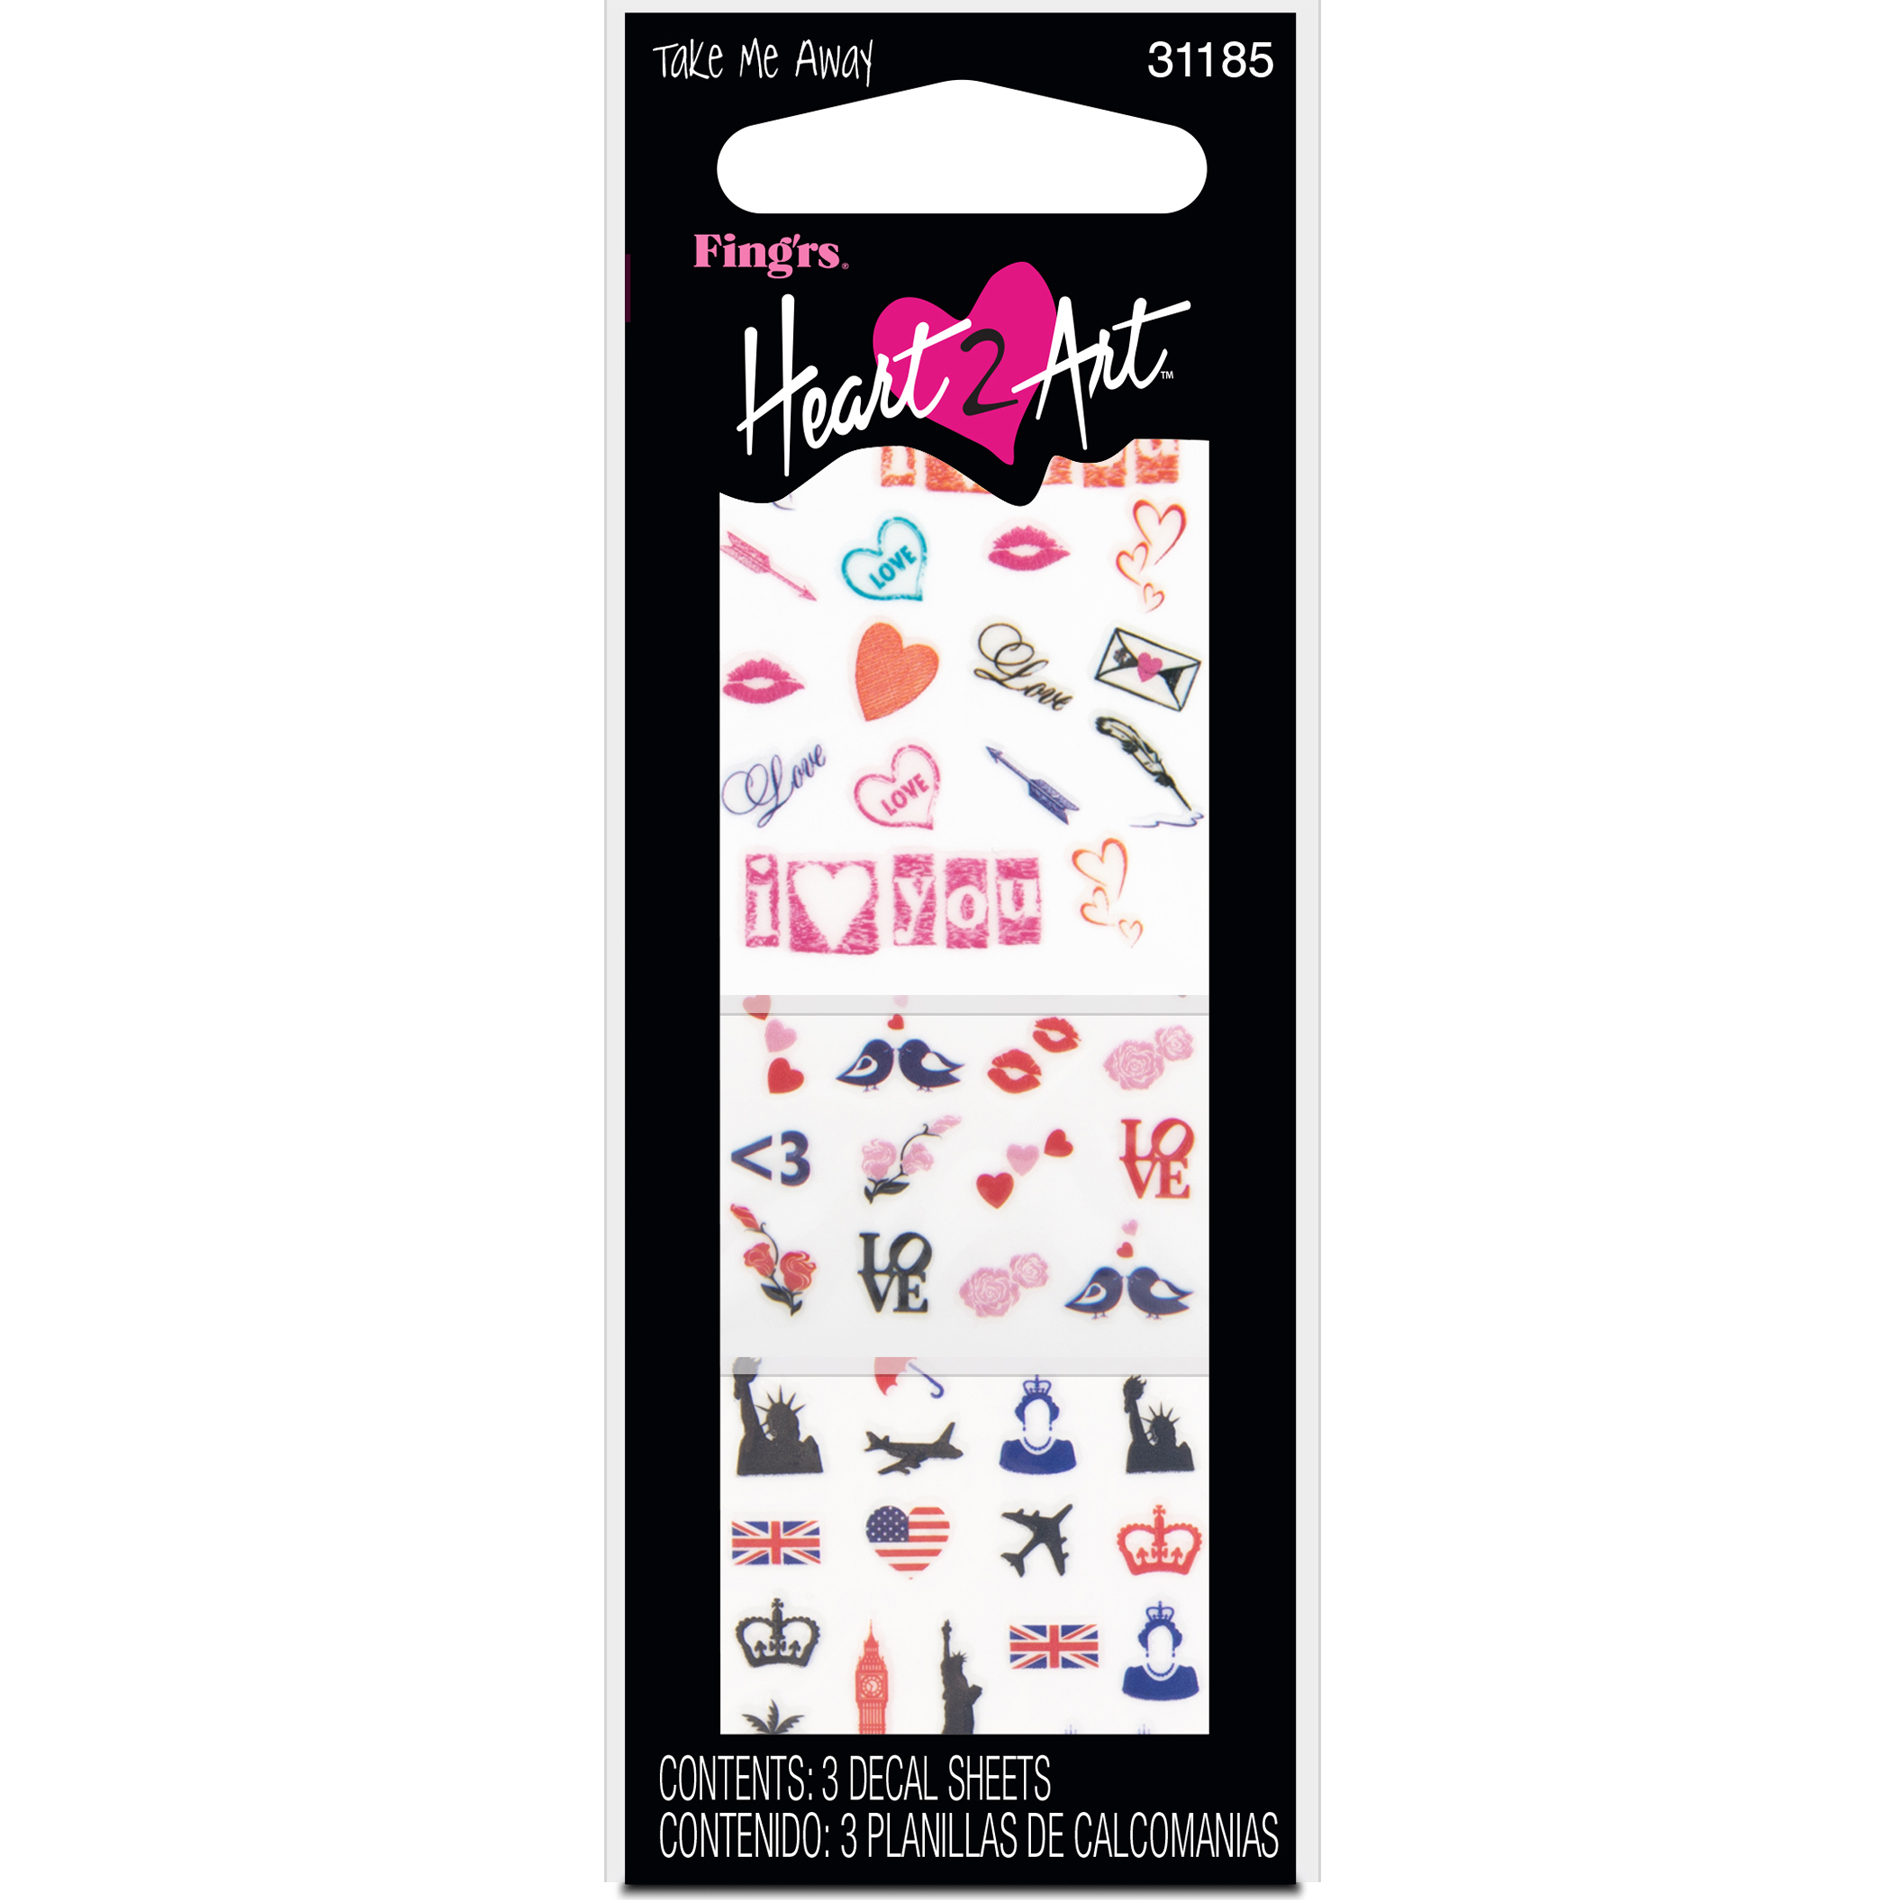 Fingrs Heart 2 Art Take Me Away Nail Decals 3 Ct.   Beauty   Nails